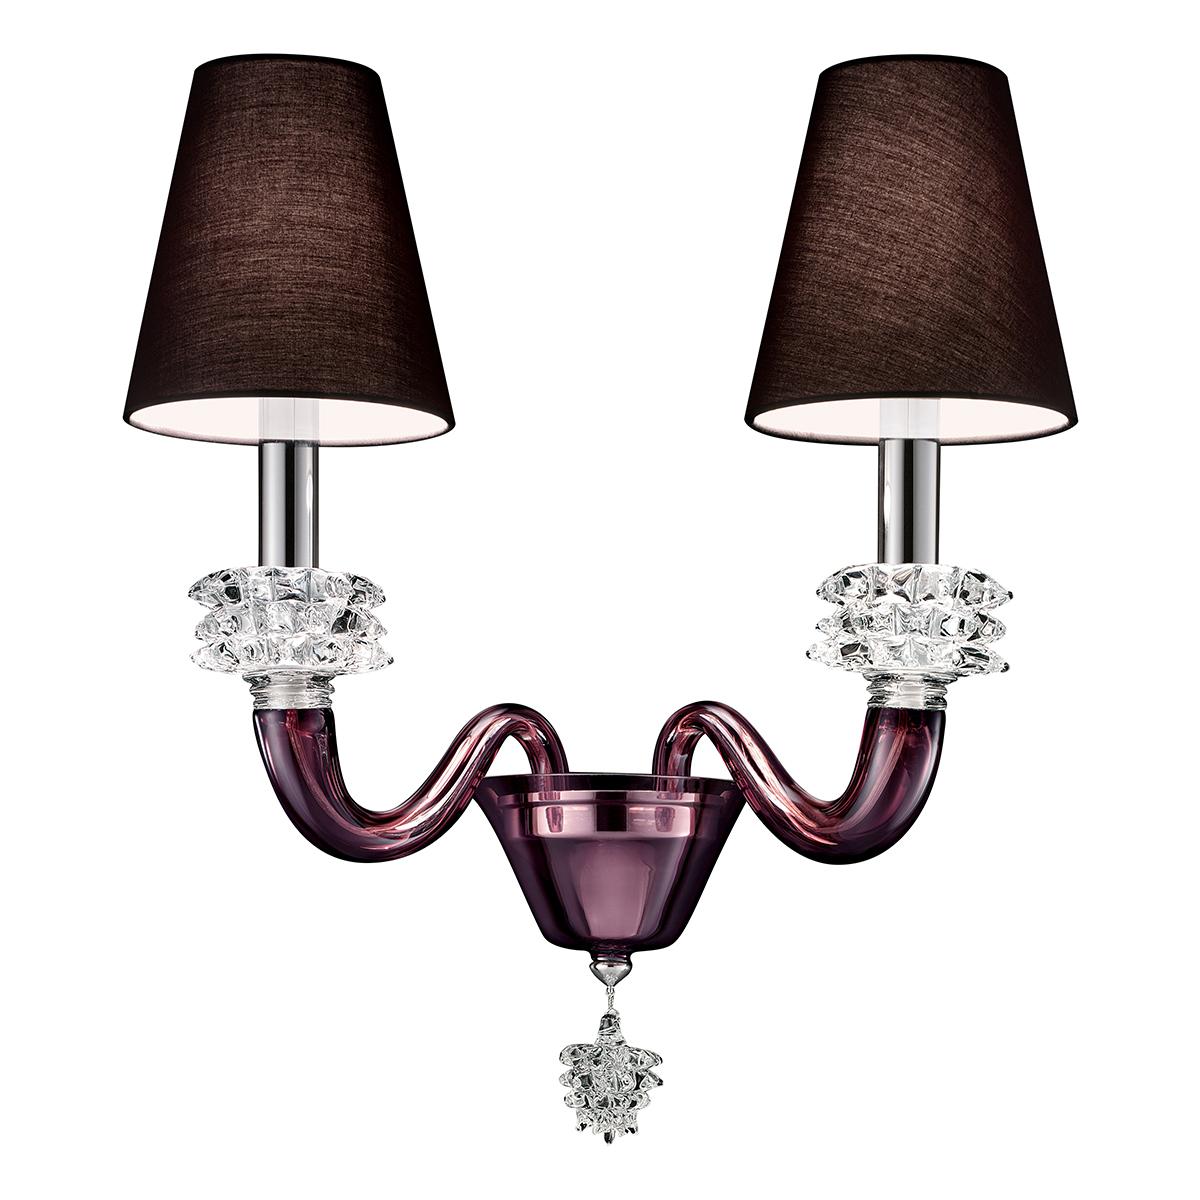 Purple (Violet_VI) Amsterdam 5562 02 Wall Sconce in Glass with Black Shade, by Barovier&Toso